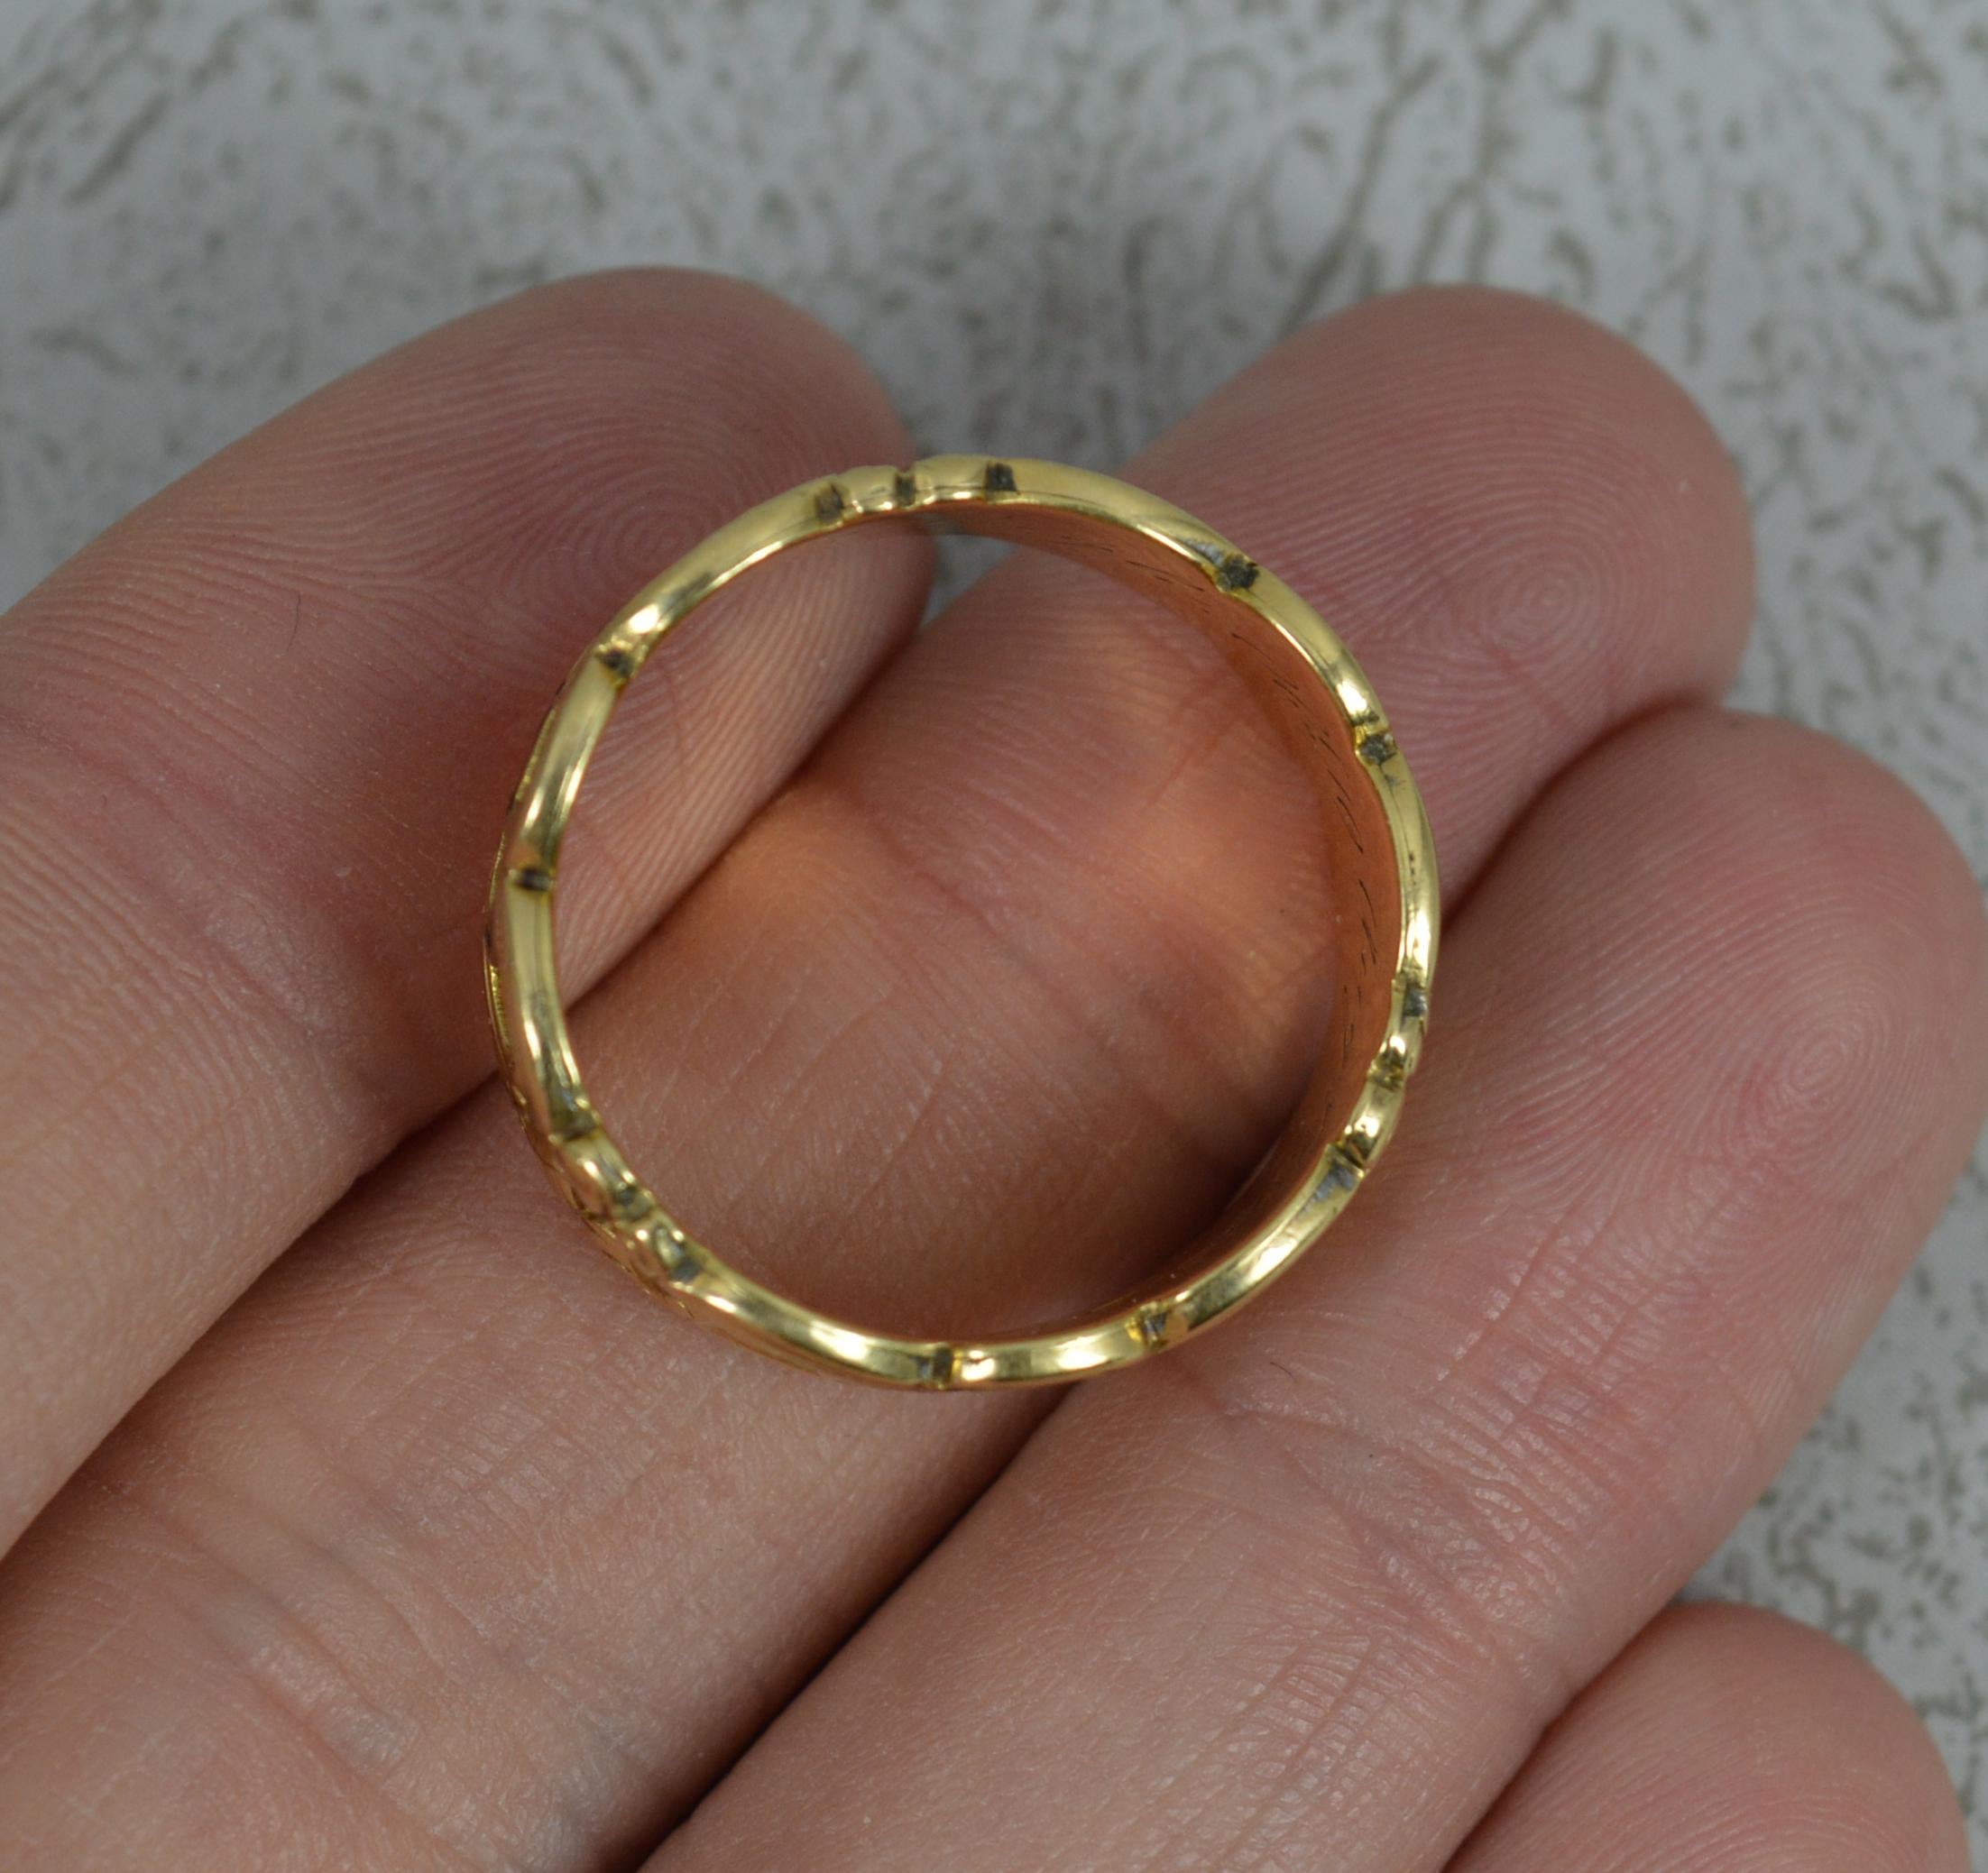 Early Victorian 1842 Victorian 18 Carat Gold Enamel In Memory of Mourning Band Ring